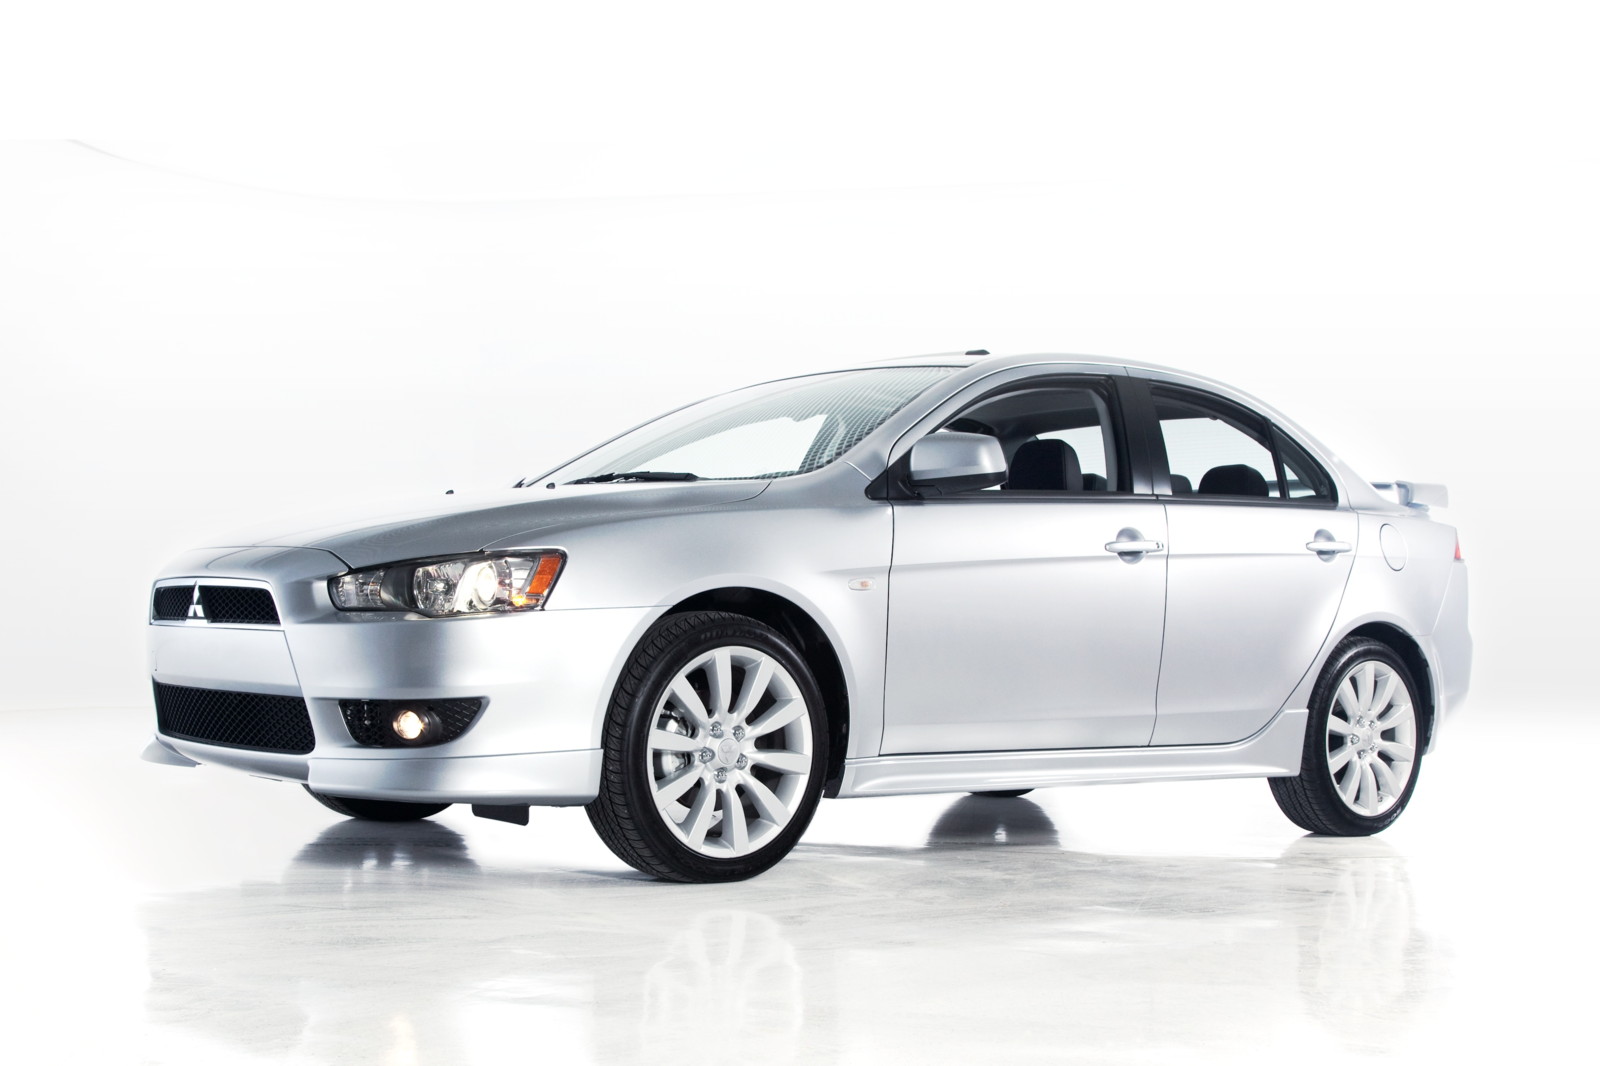 2010 Mitsubishi Lancer Review, Ratings, Specs, Prices, and Photos - The